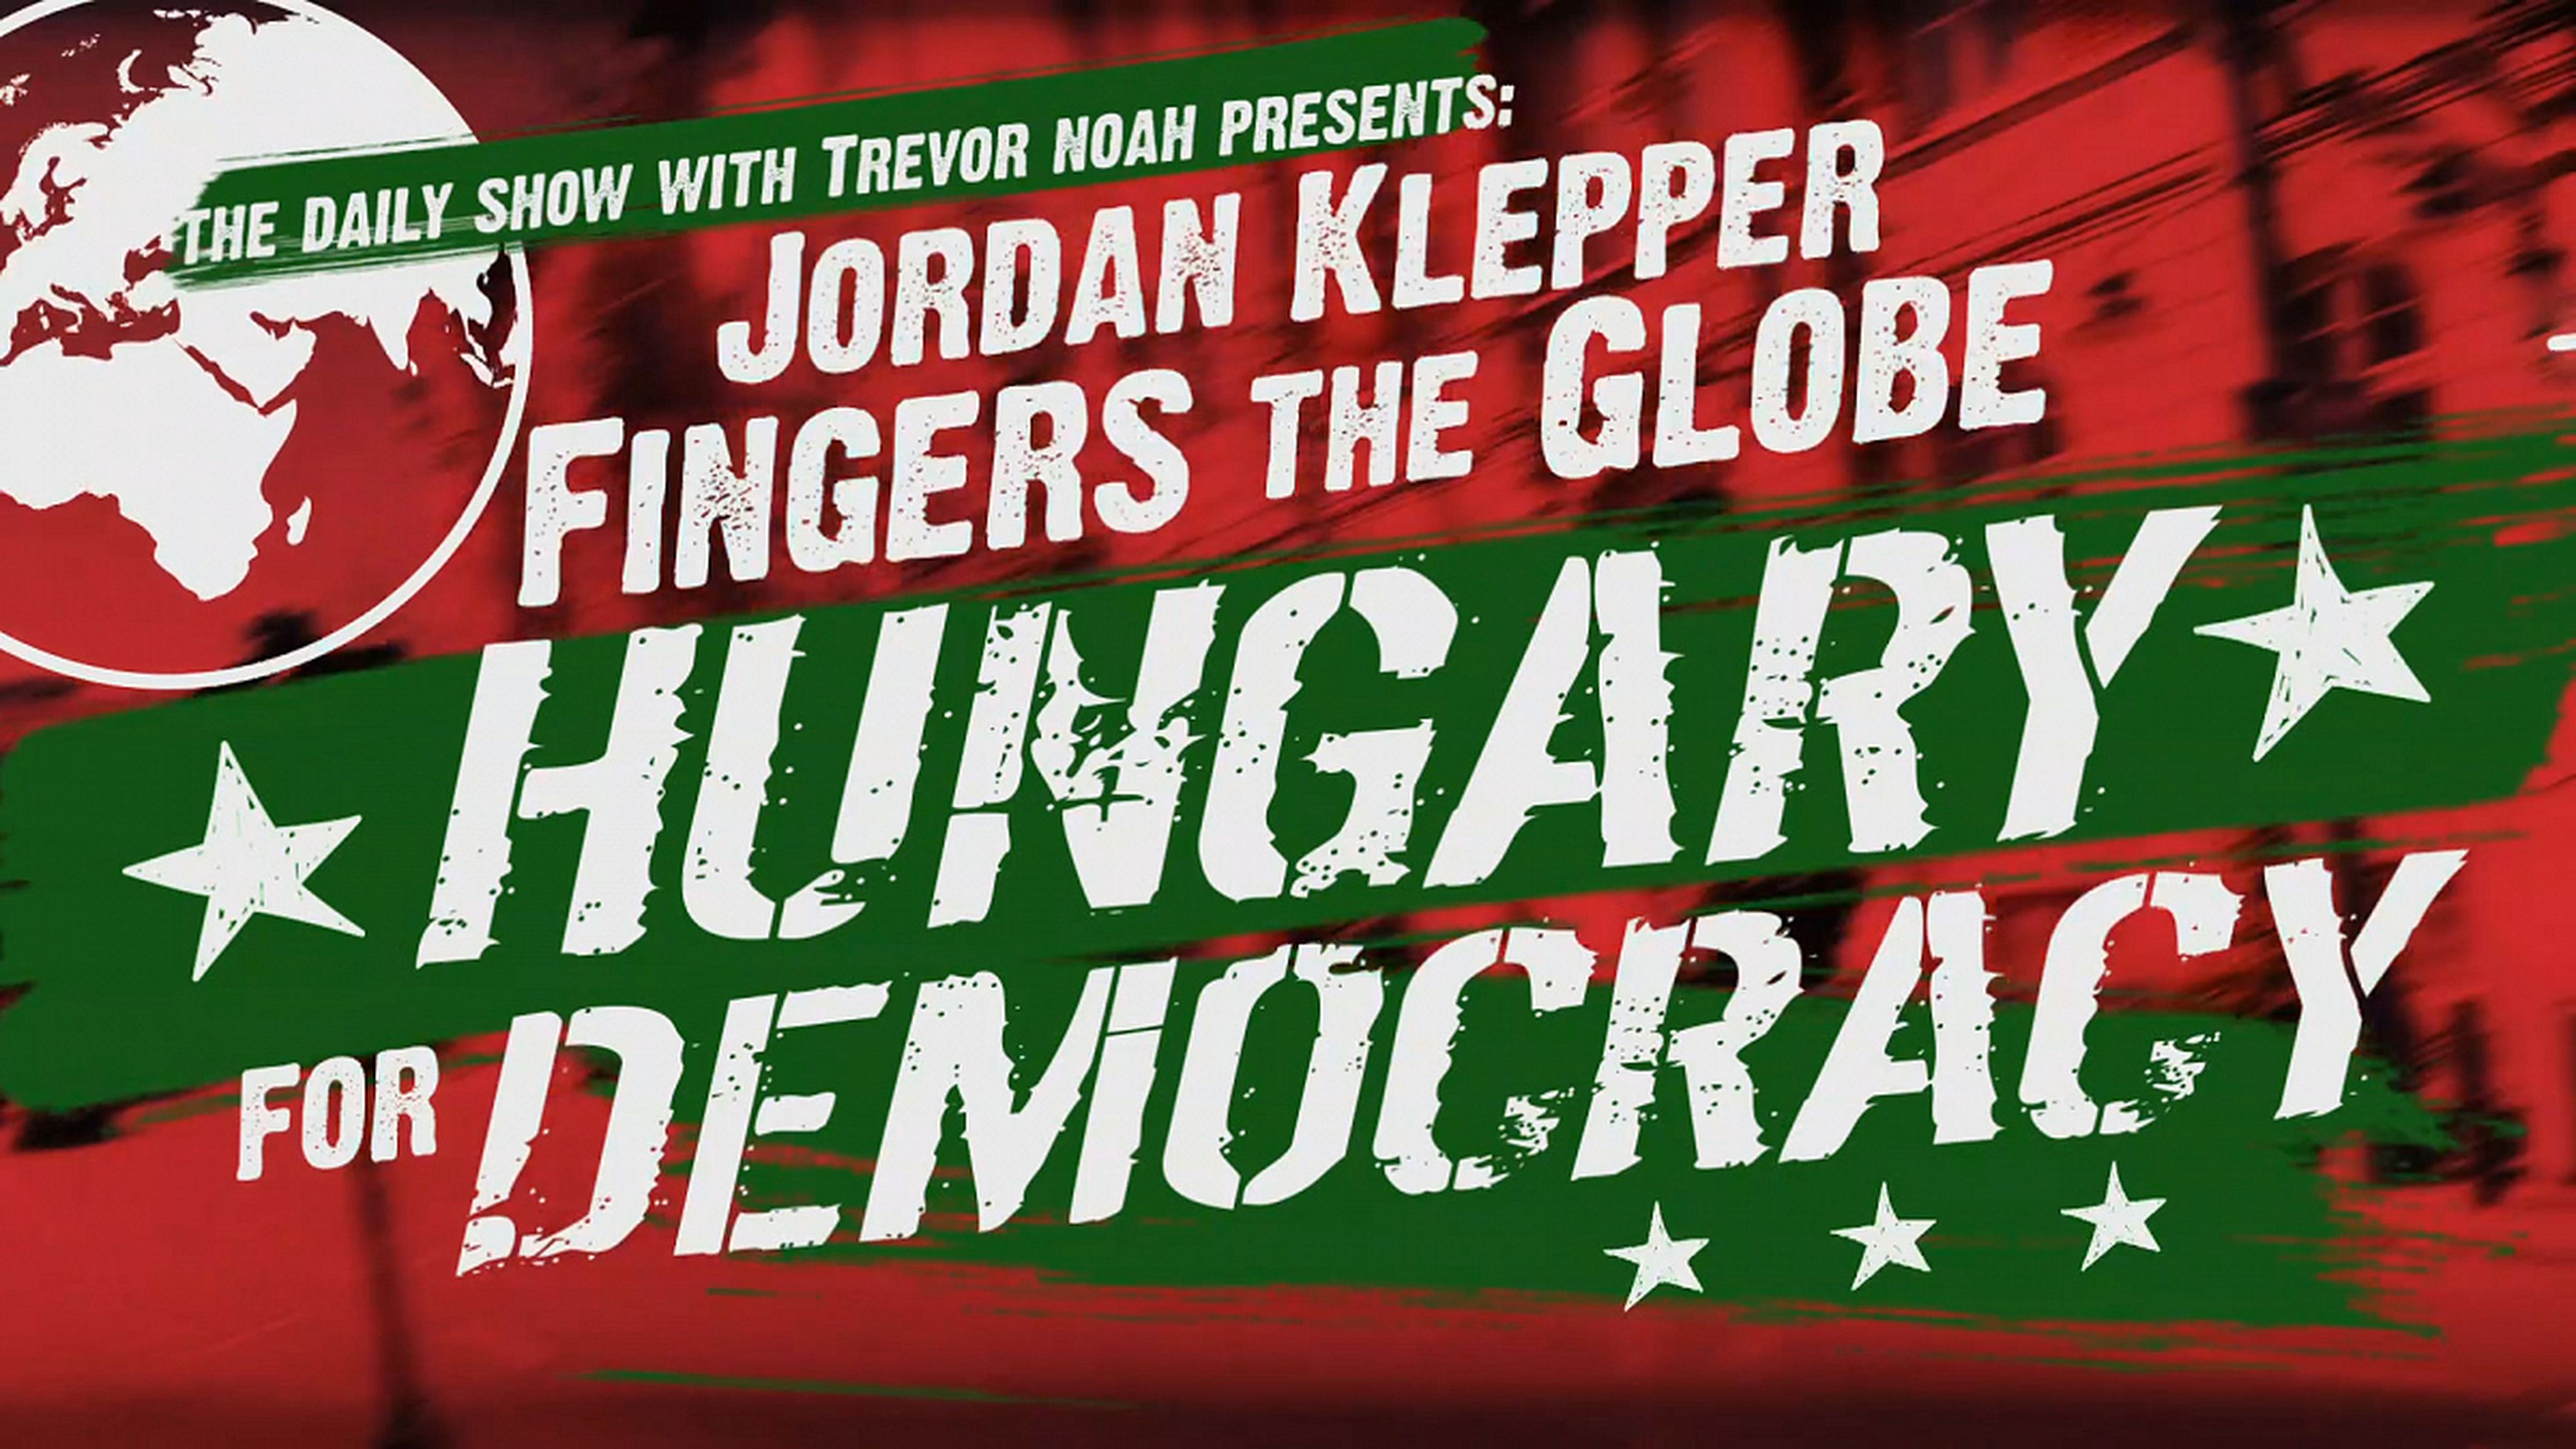 The Daily Show With Trevor Noah Presents: Jordan Klepper Fingers The Globe — Hungary For Democracy"